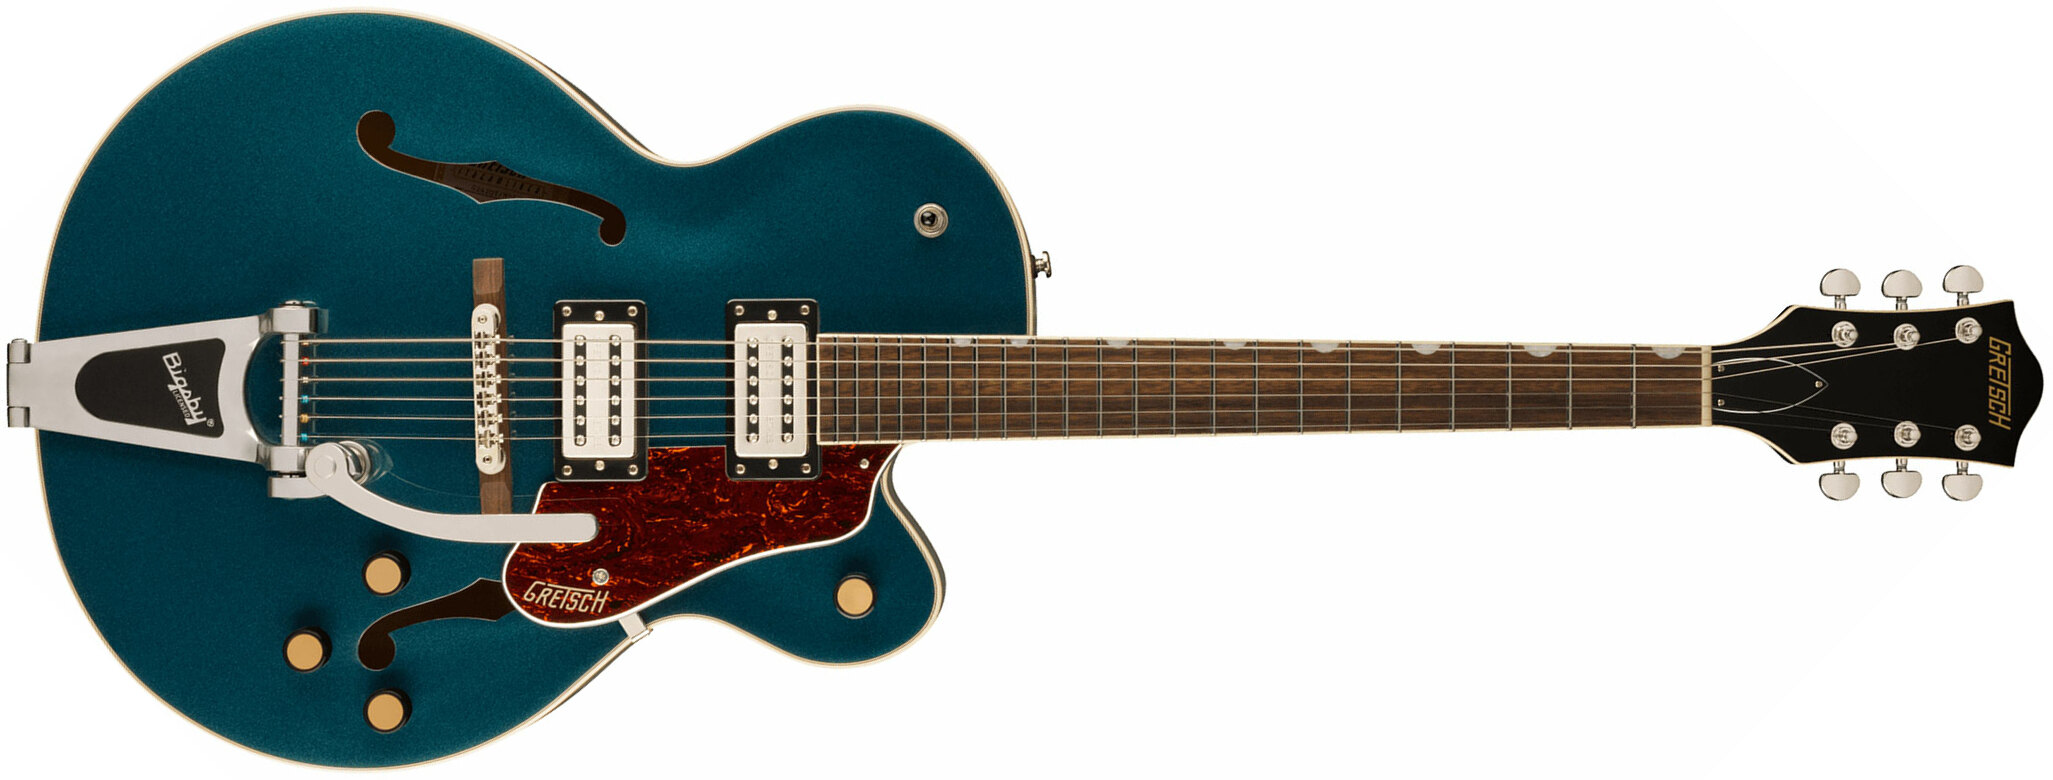 Gretsch G2420t Streamliner Hollow Body Bigsby 2h Trem Lau - Midnight Sapphire - Hollow-body electric guitar - Main picture